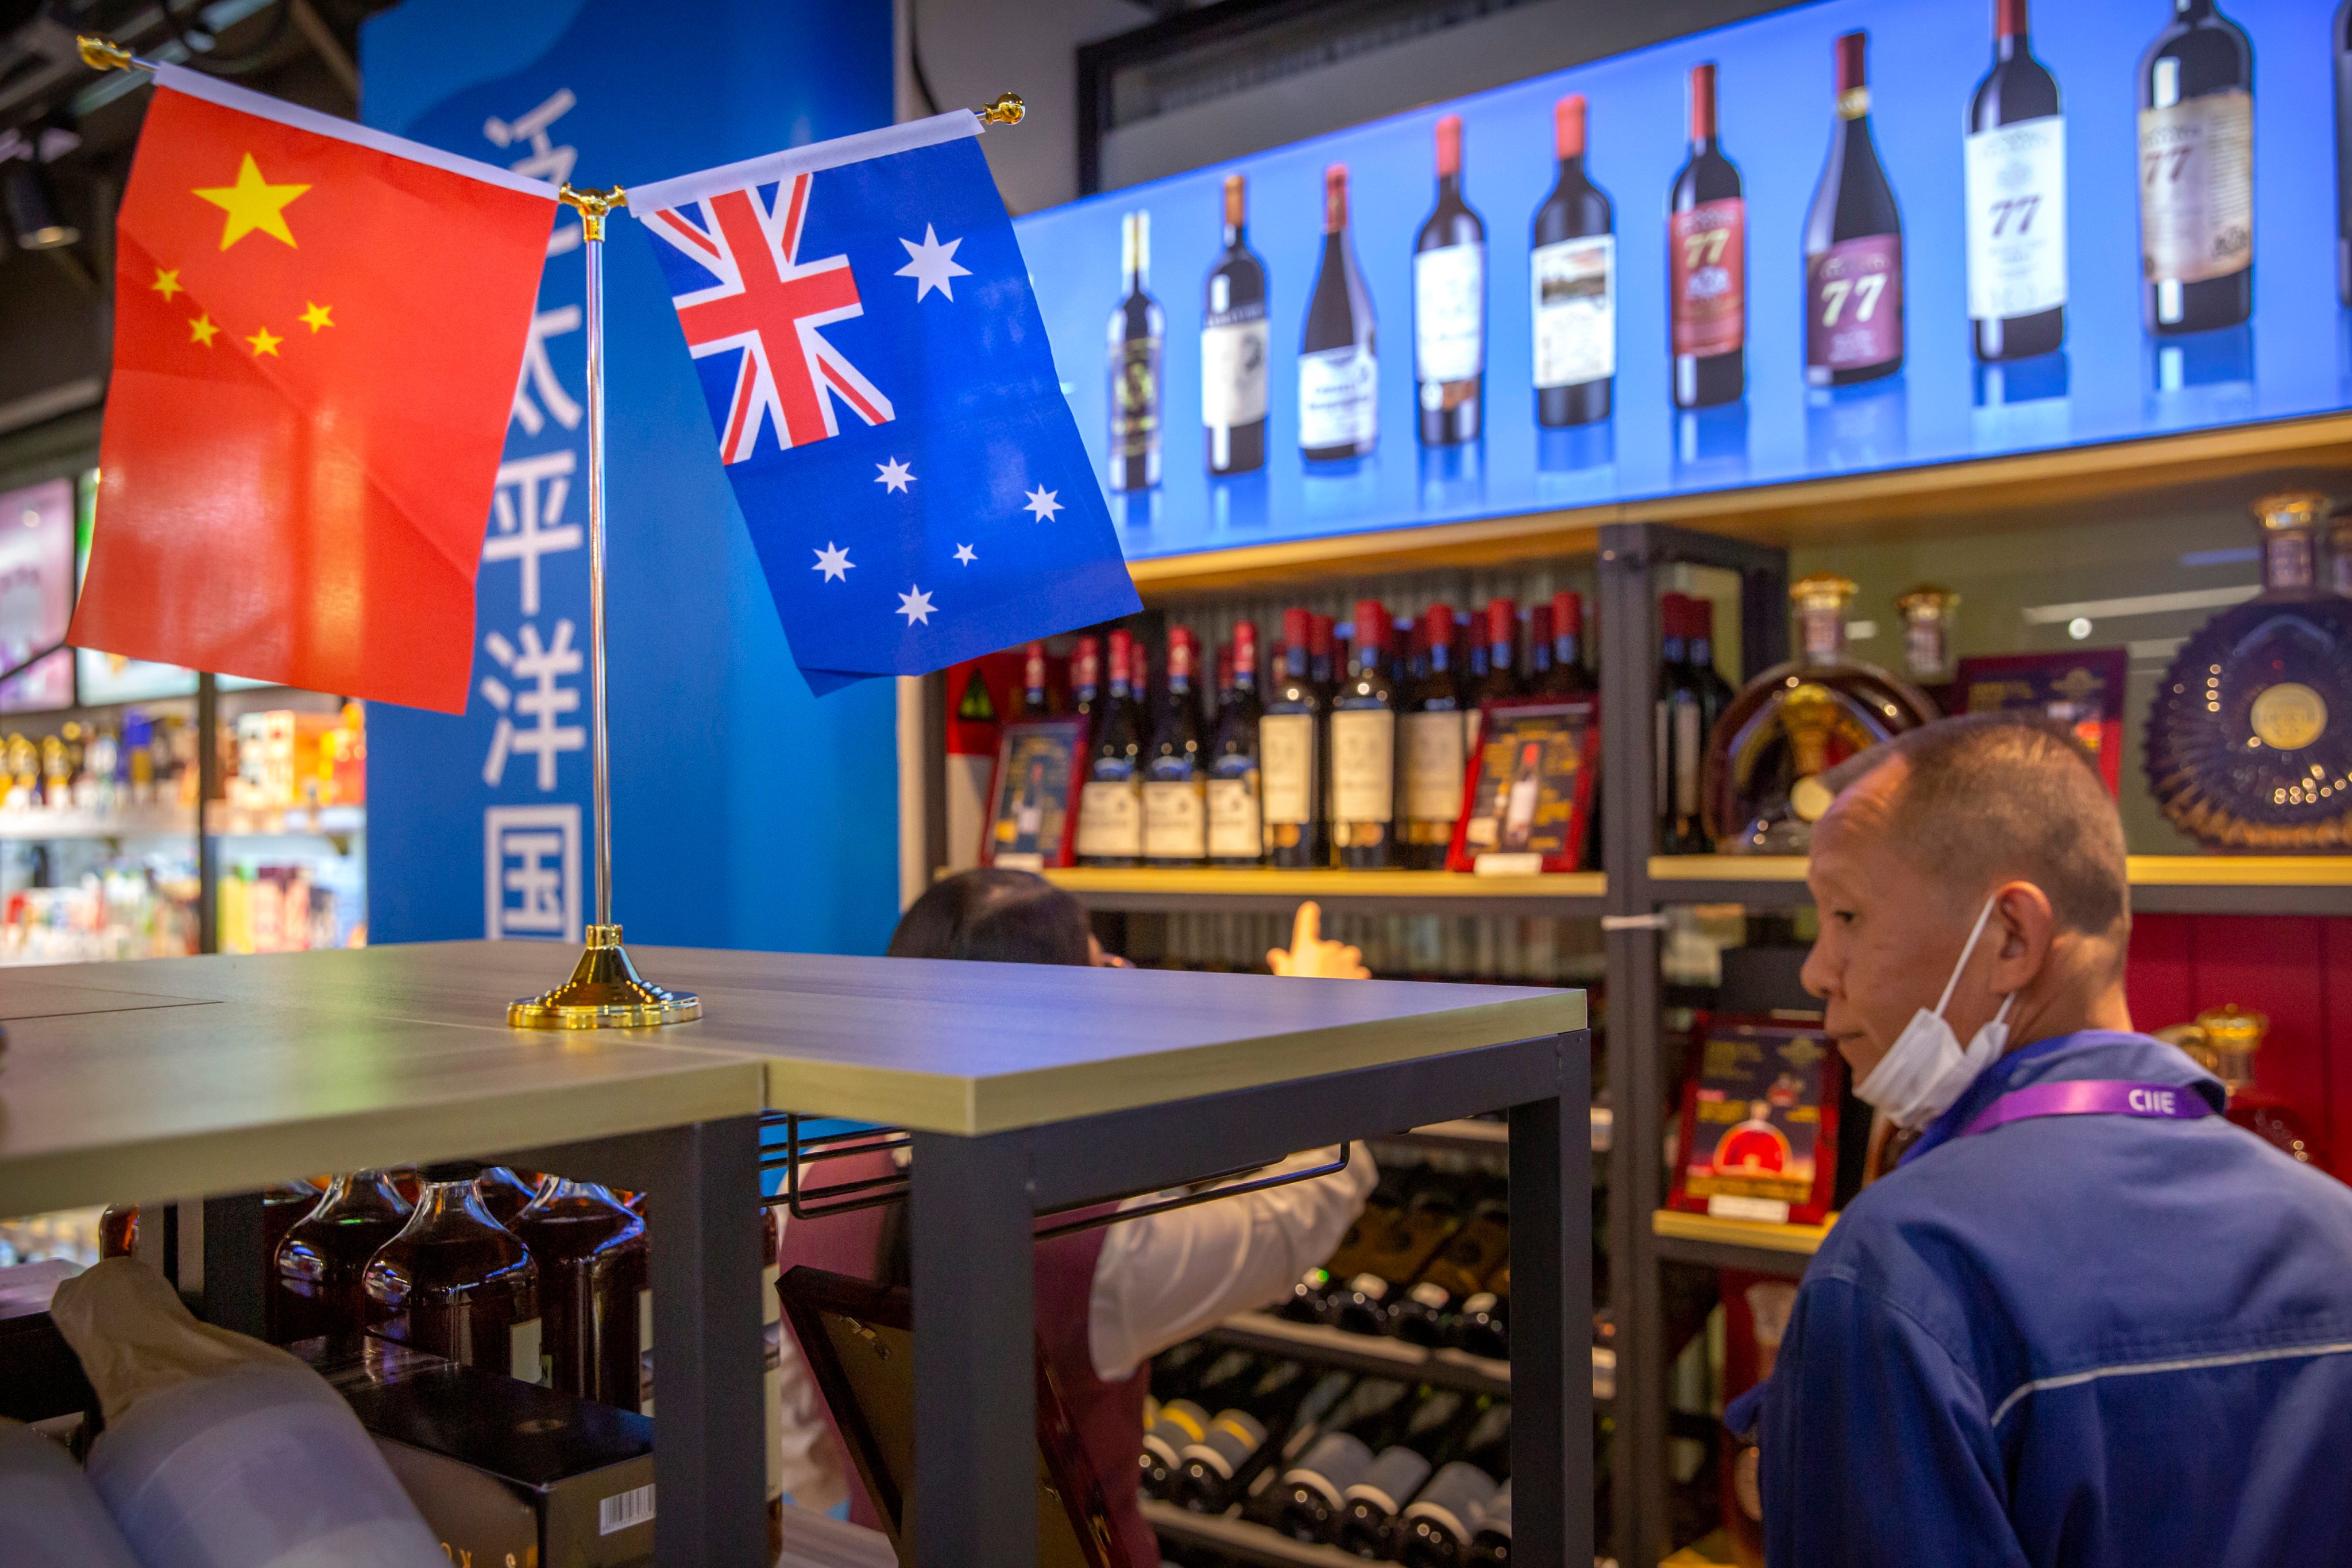 A display of Australian wines at the China International Import Expo in Shanghai. A new study has shown trade with China has provided direct benefits to Australian households. Photo: AP